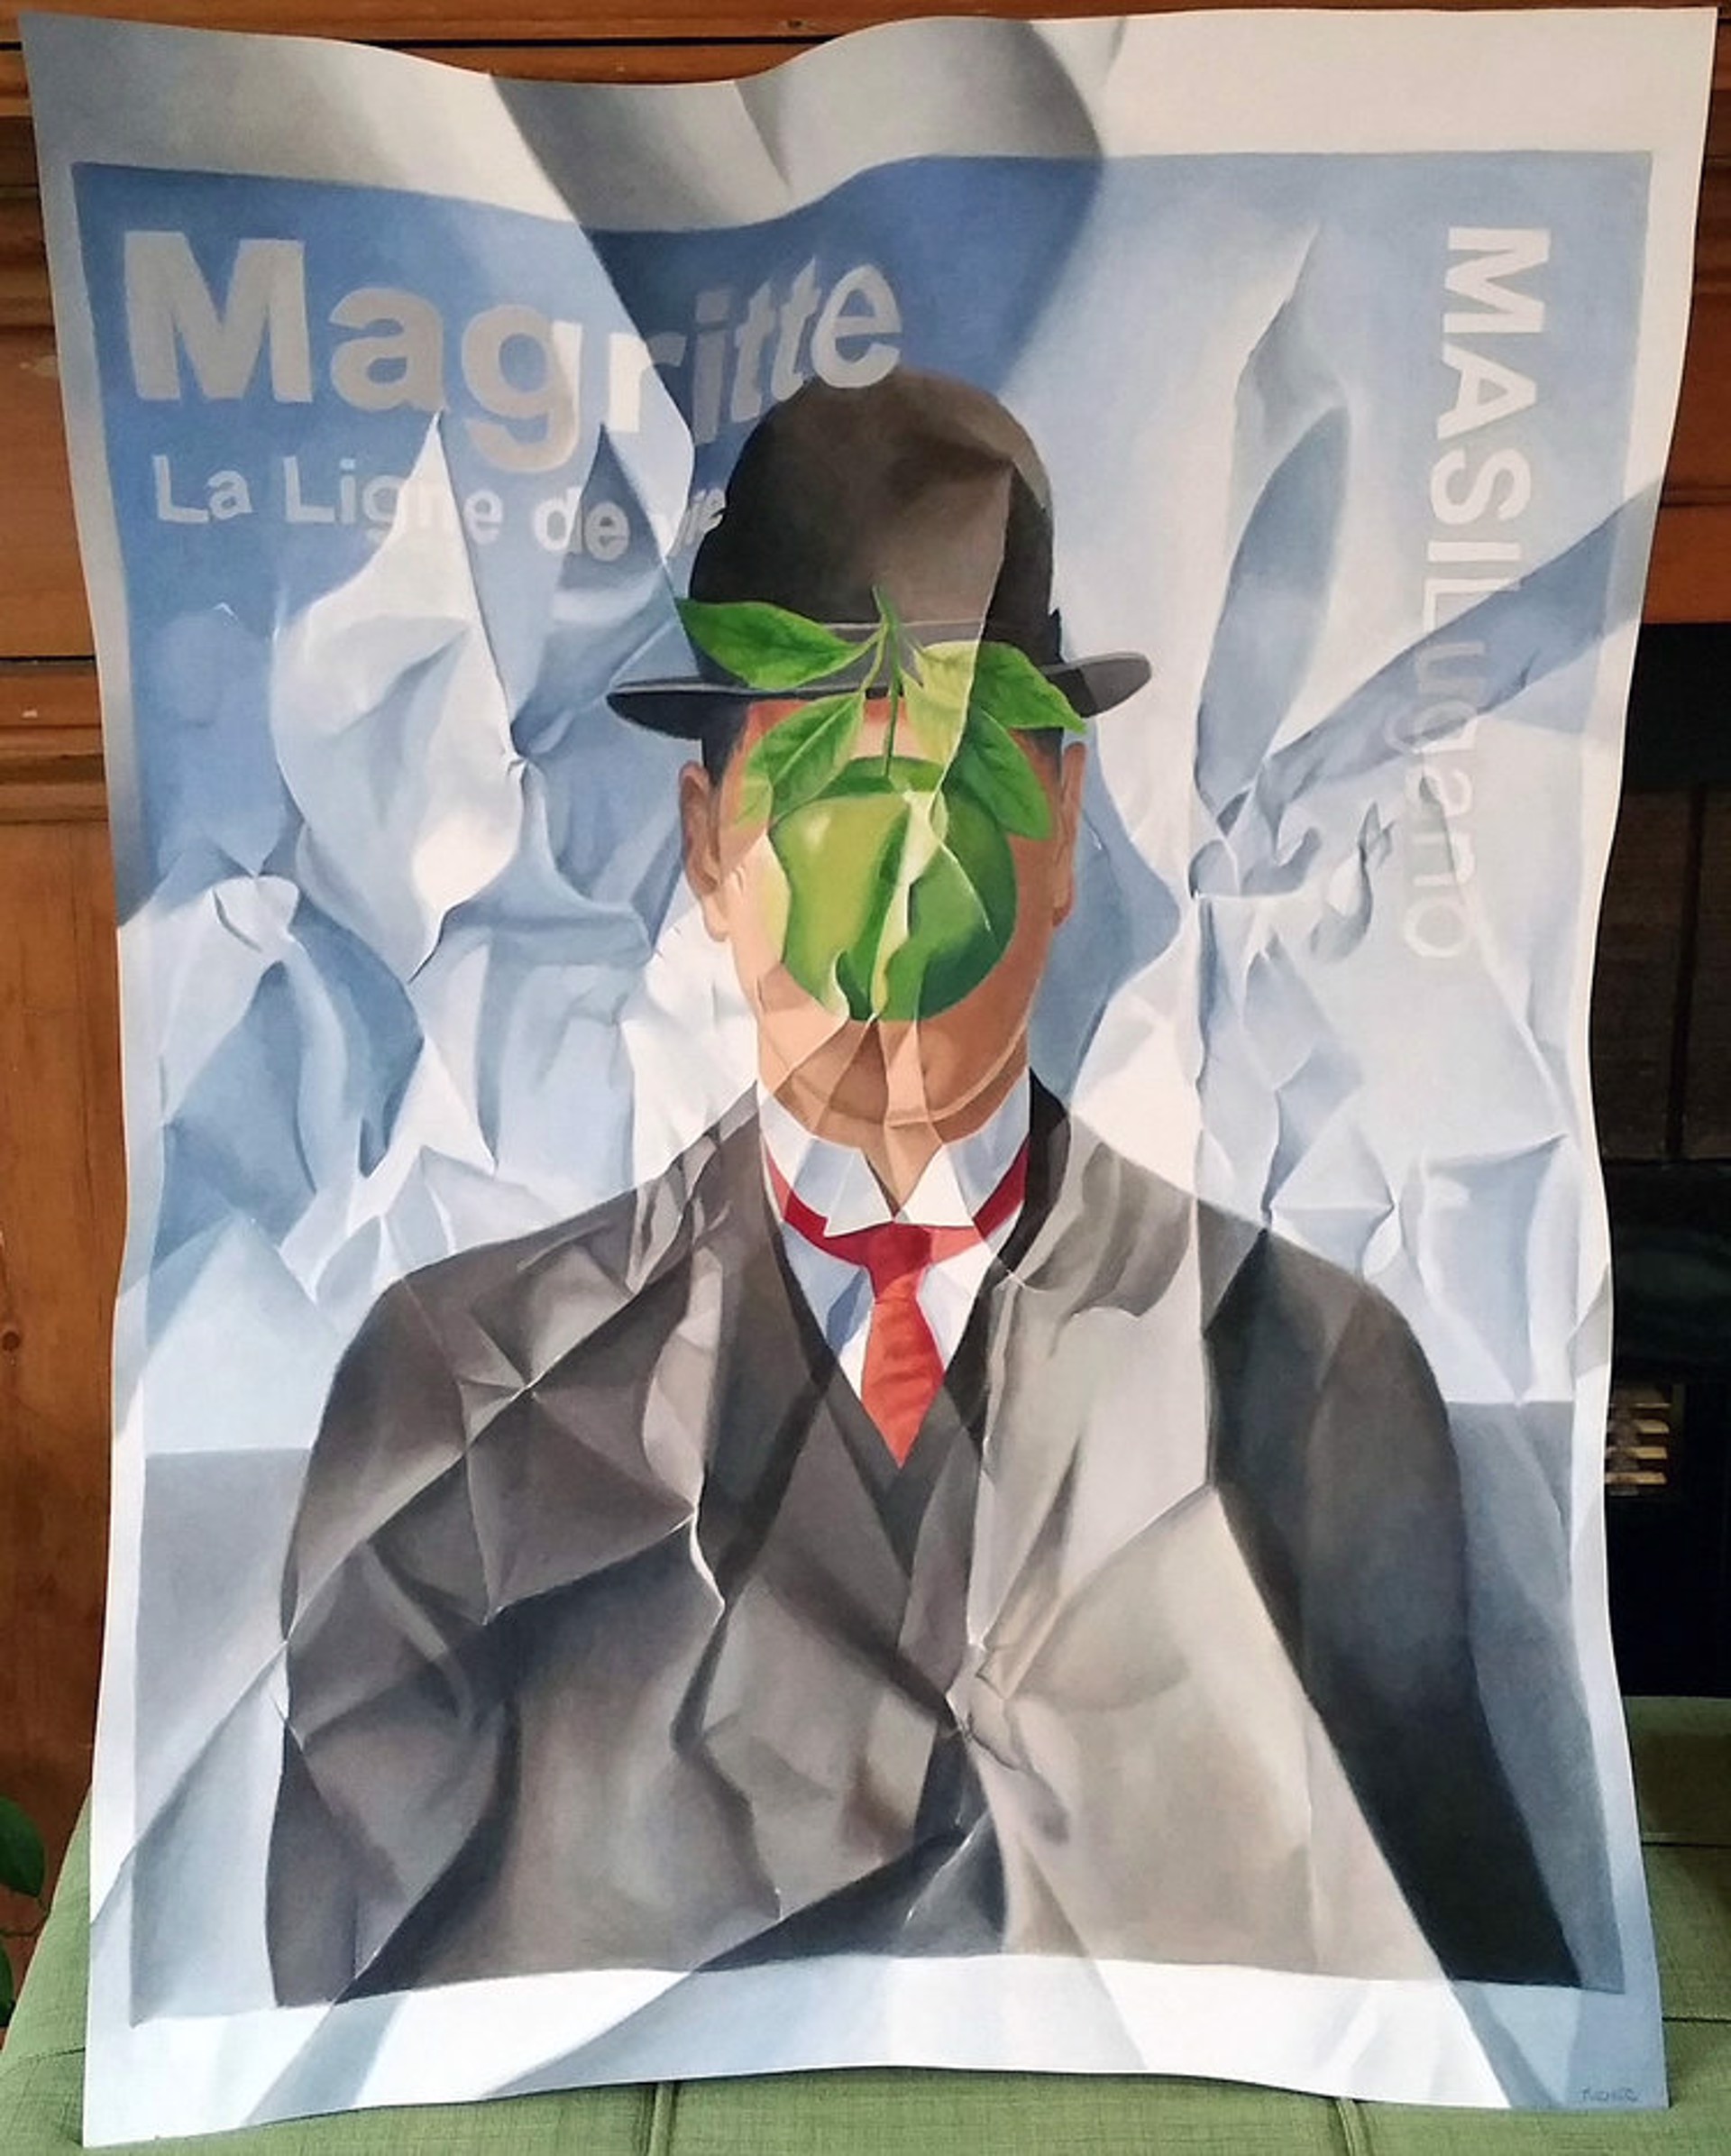 MAGRITTE AT THE MASI LUGANO by CLIFF TURNER